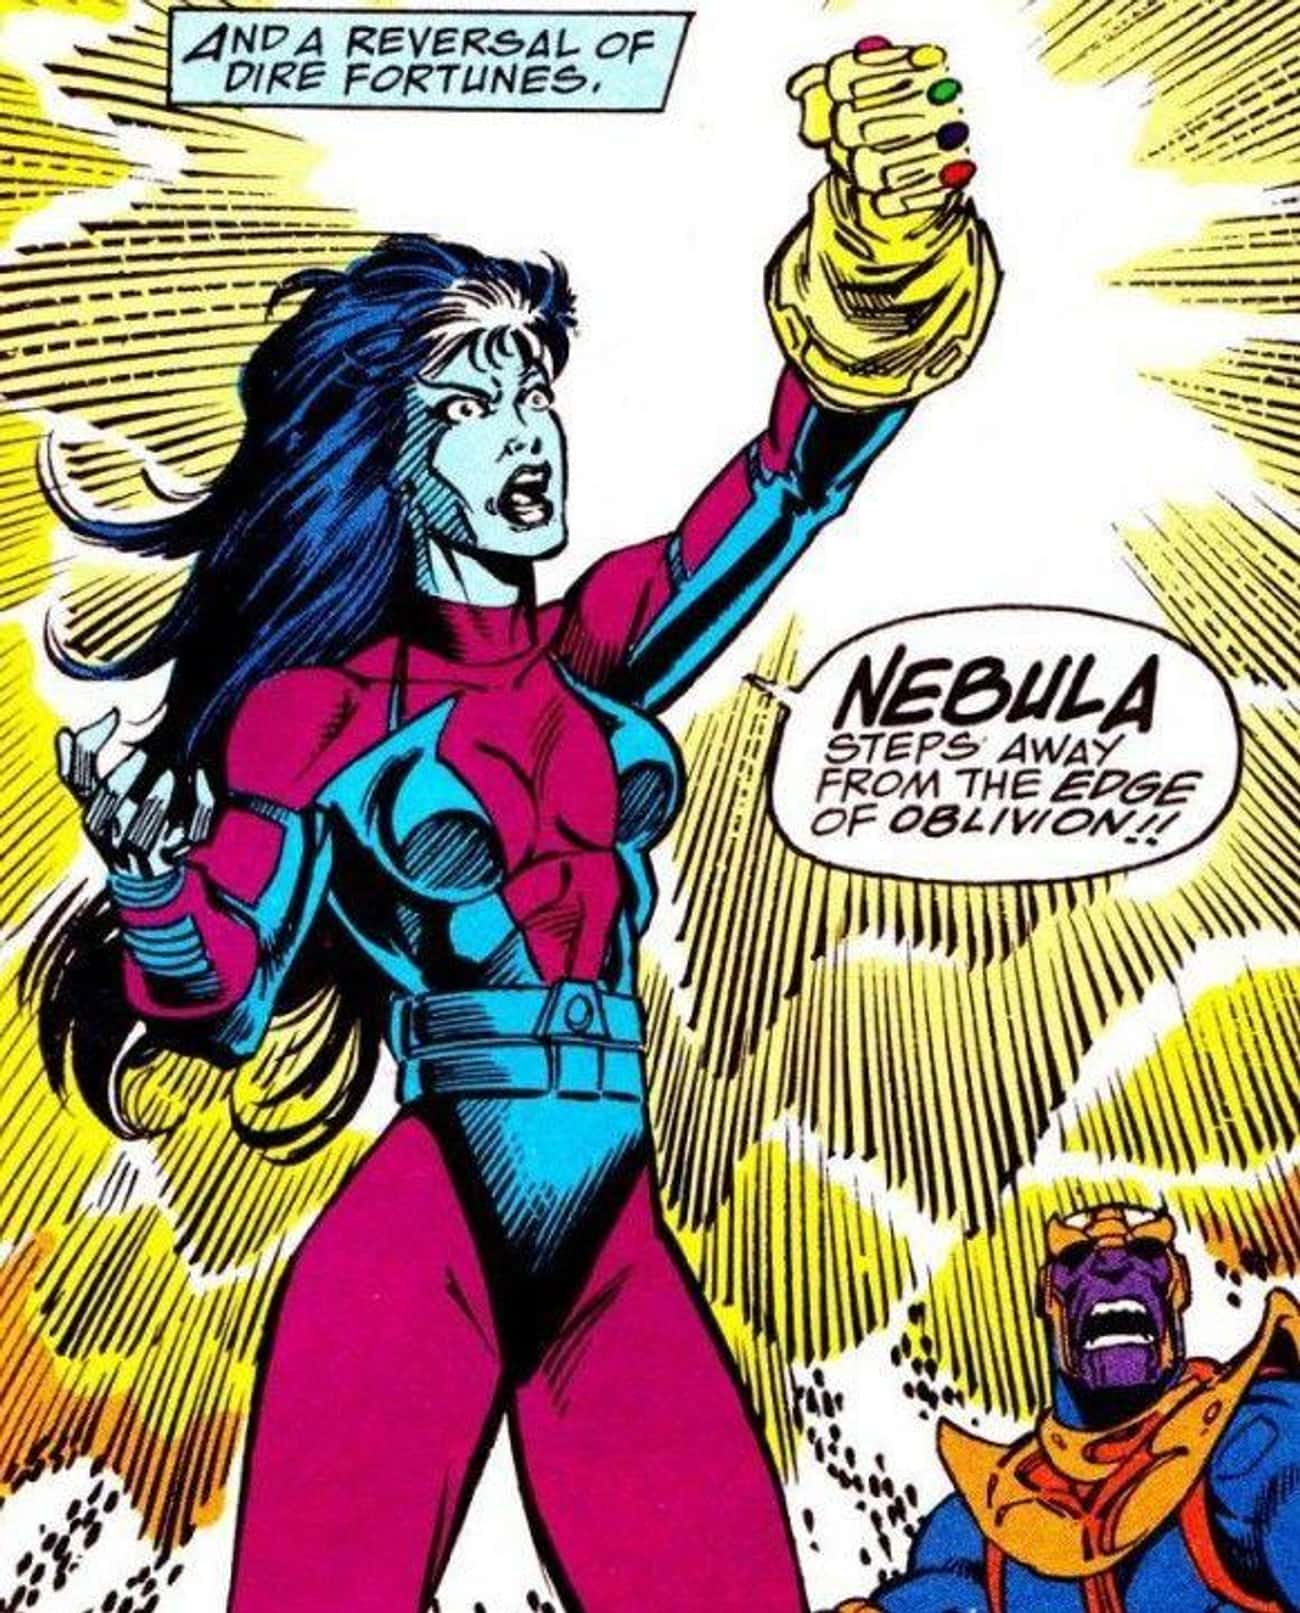 Nebula Is Turned Into A Sort Of Statue By Her Father